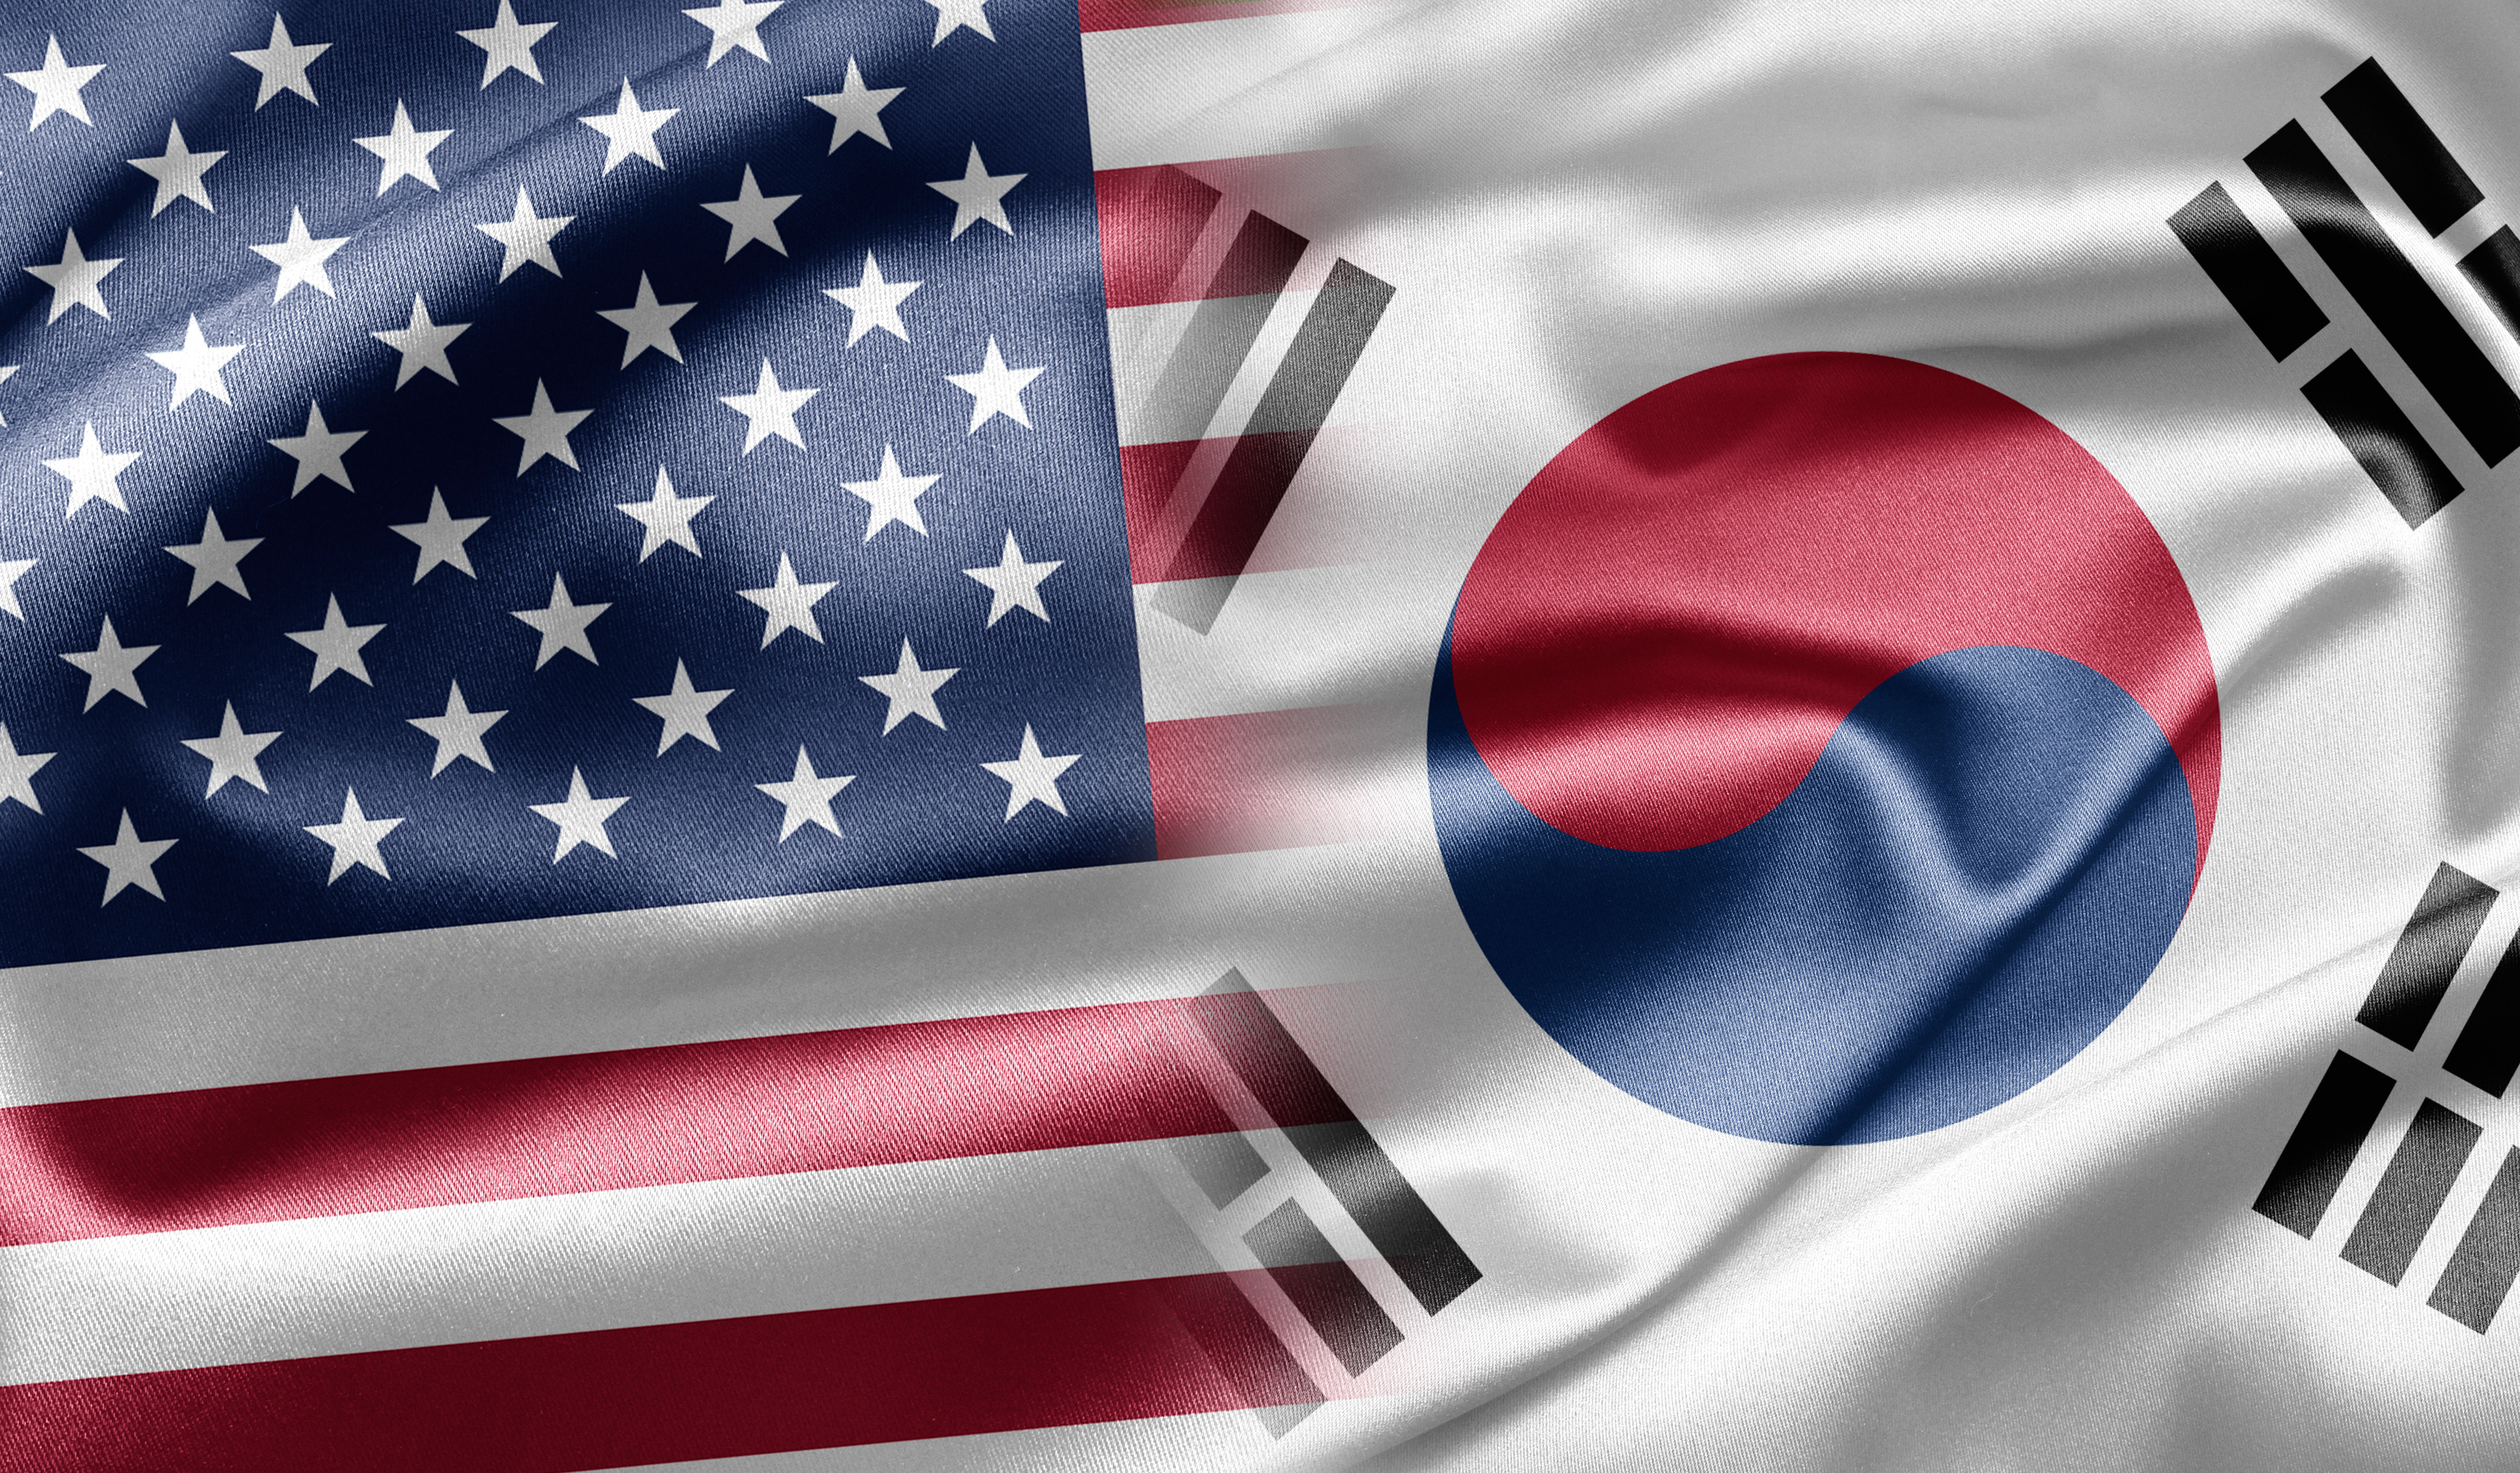 The flags of the USA and South Korea side by side.